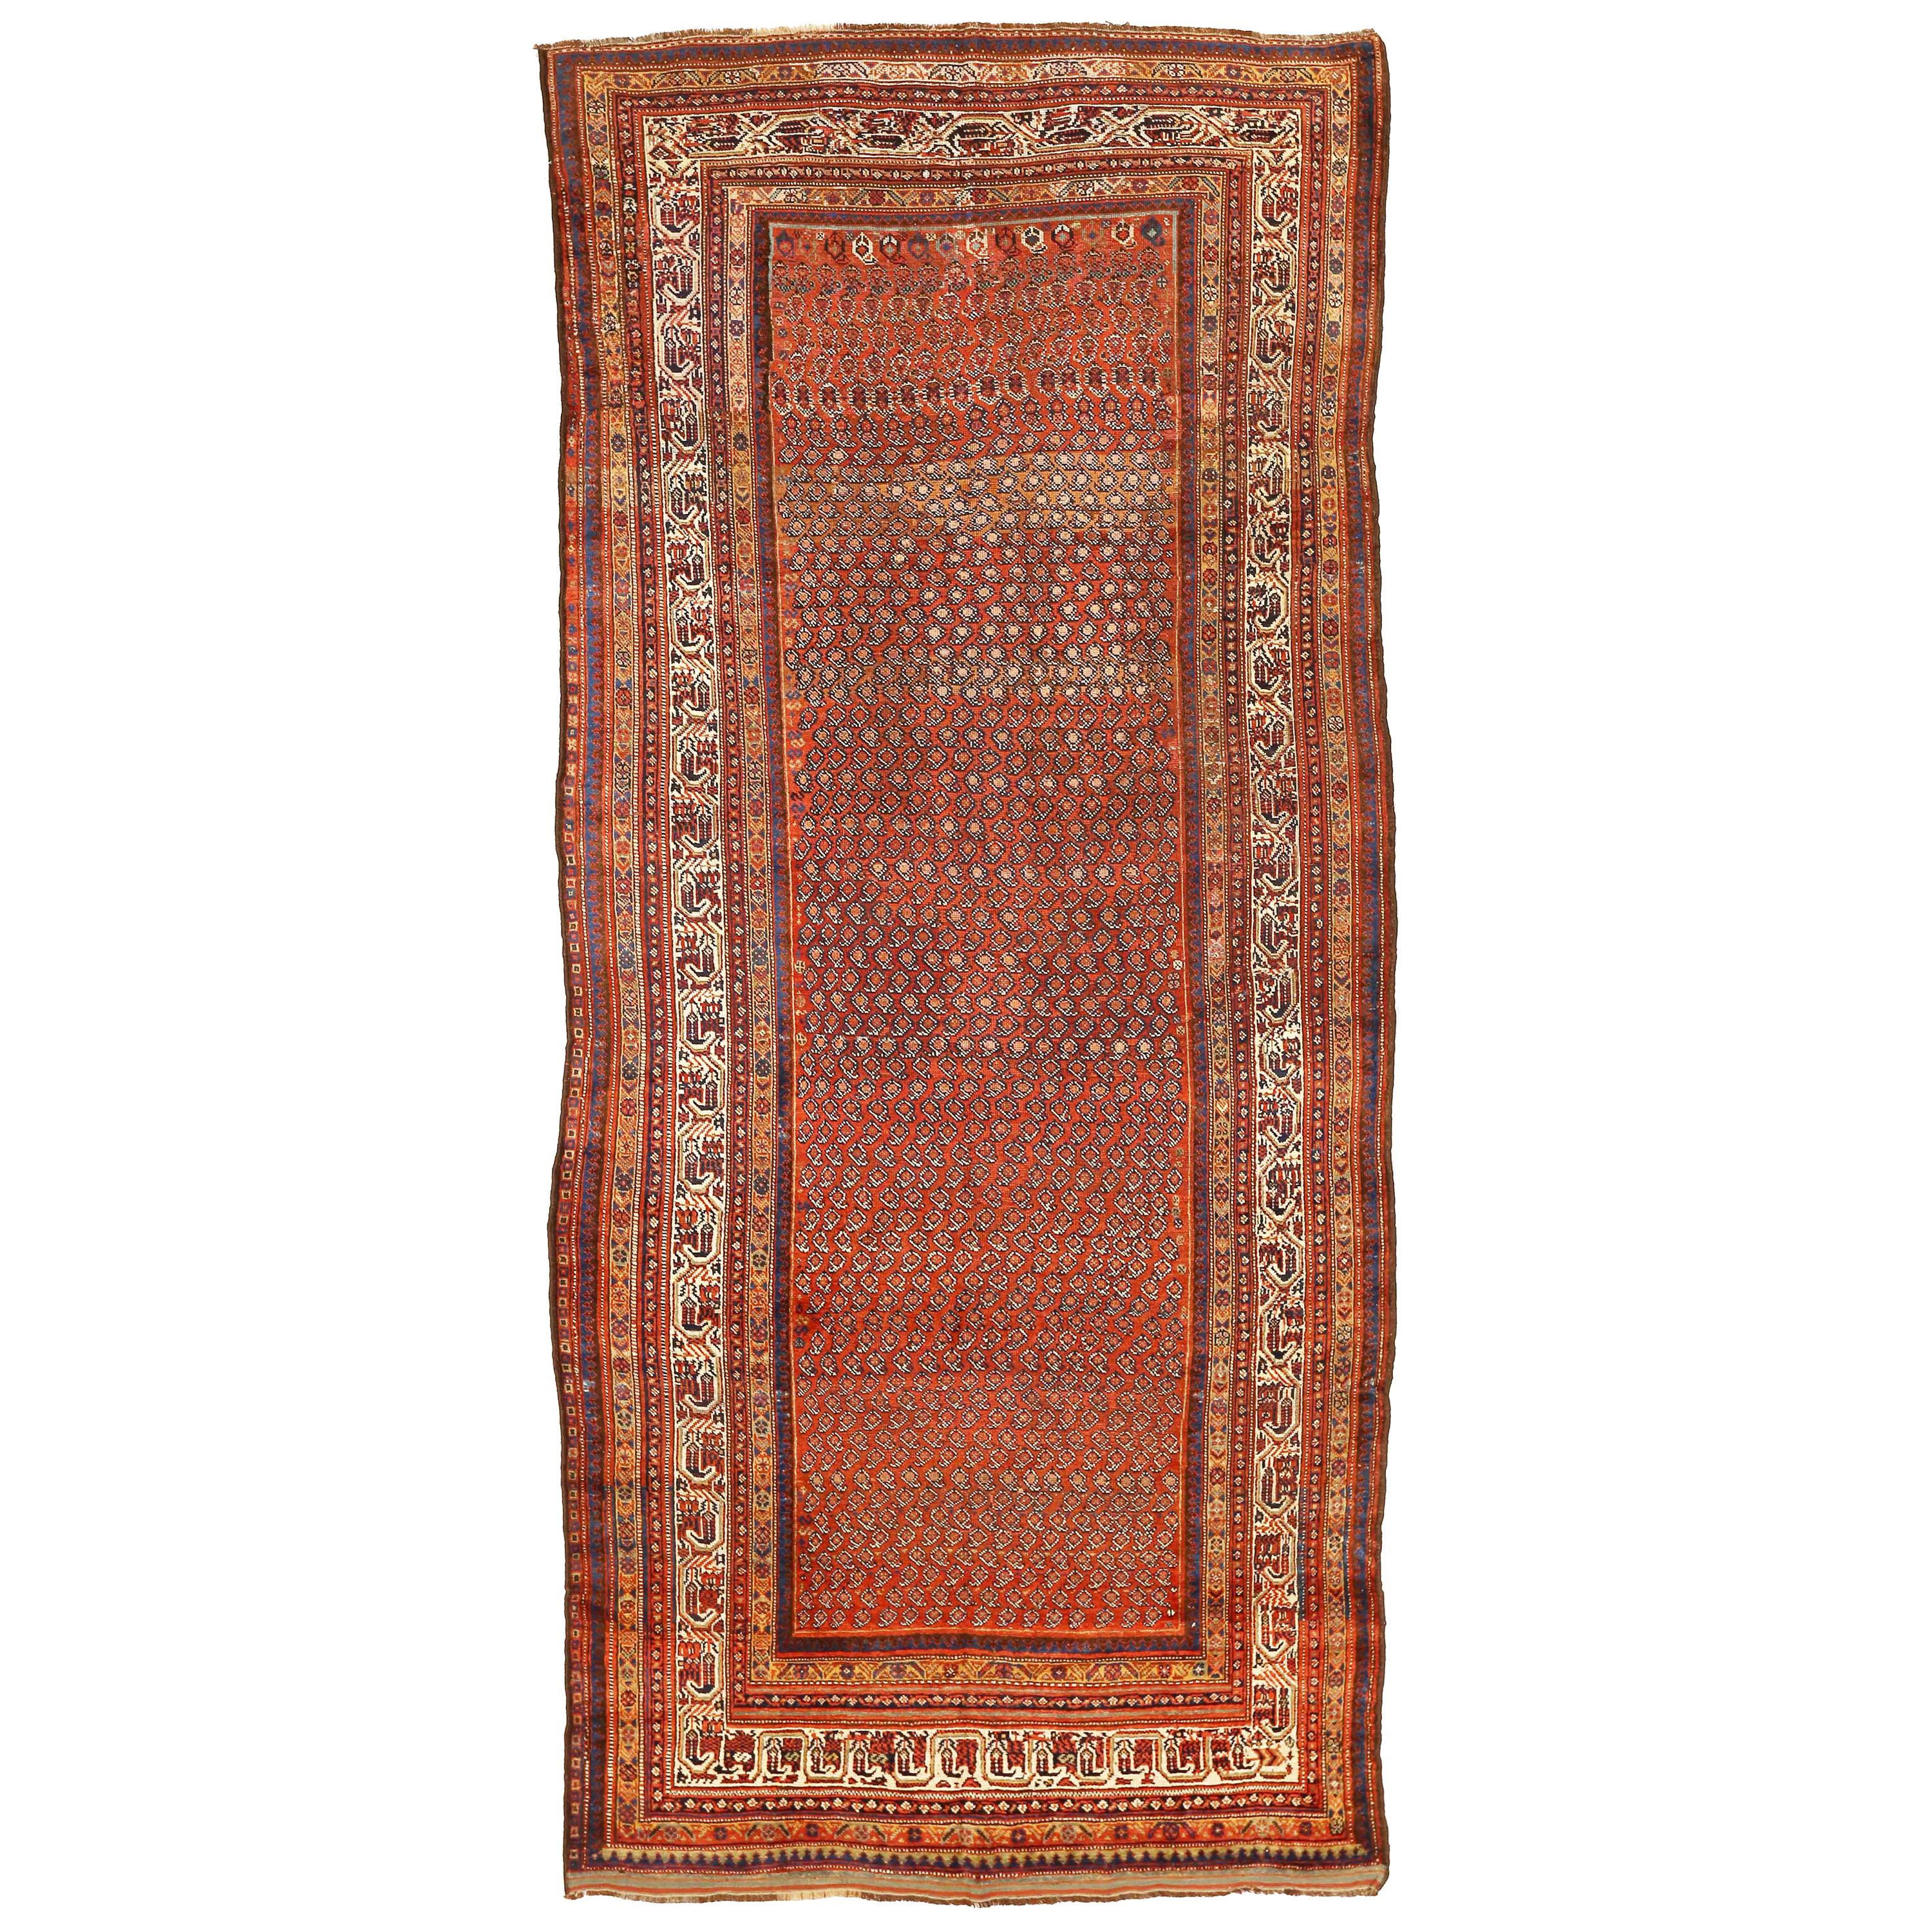 Antique Persian Shiraz Rug with Red and Black Tribal Motif